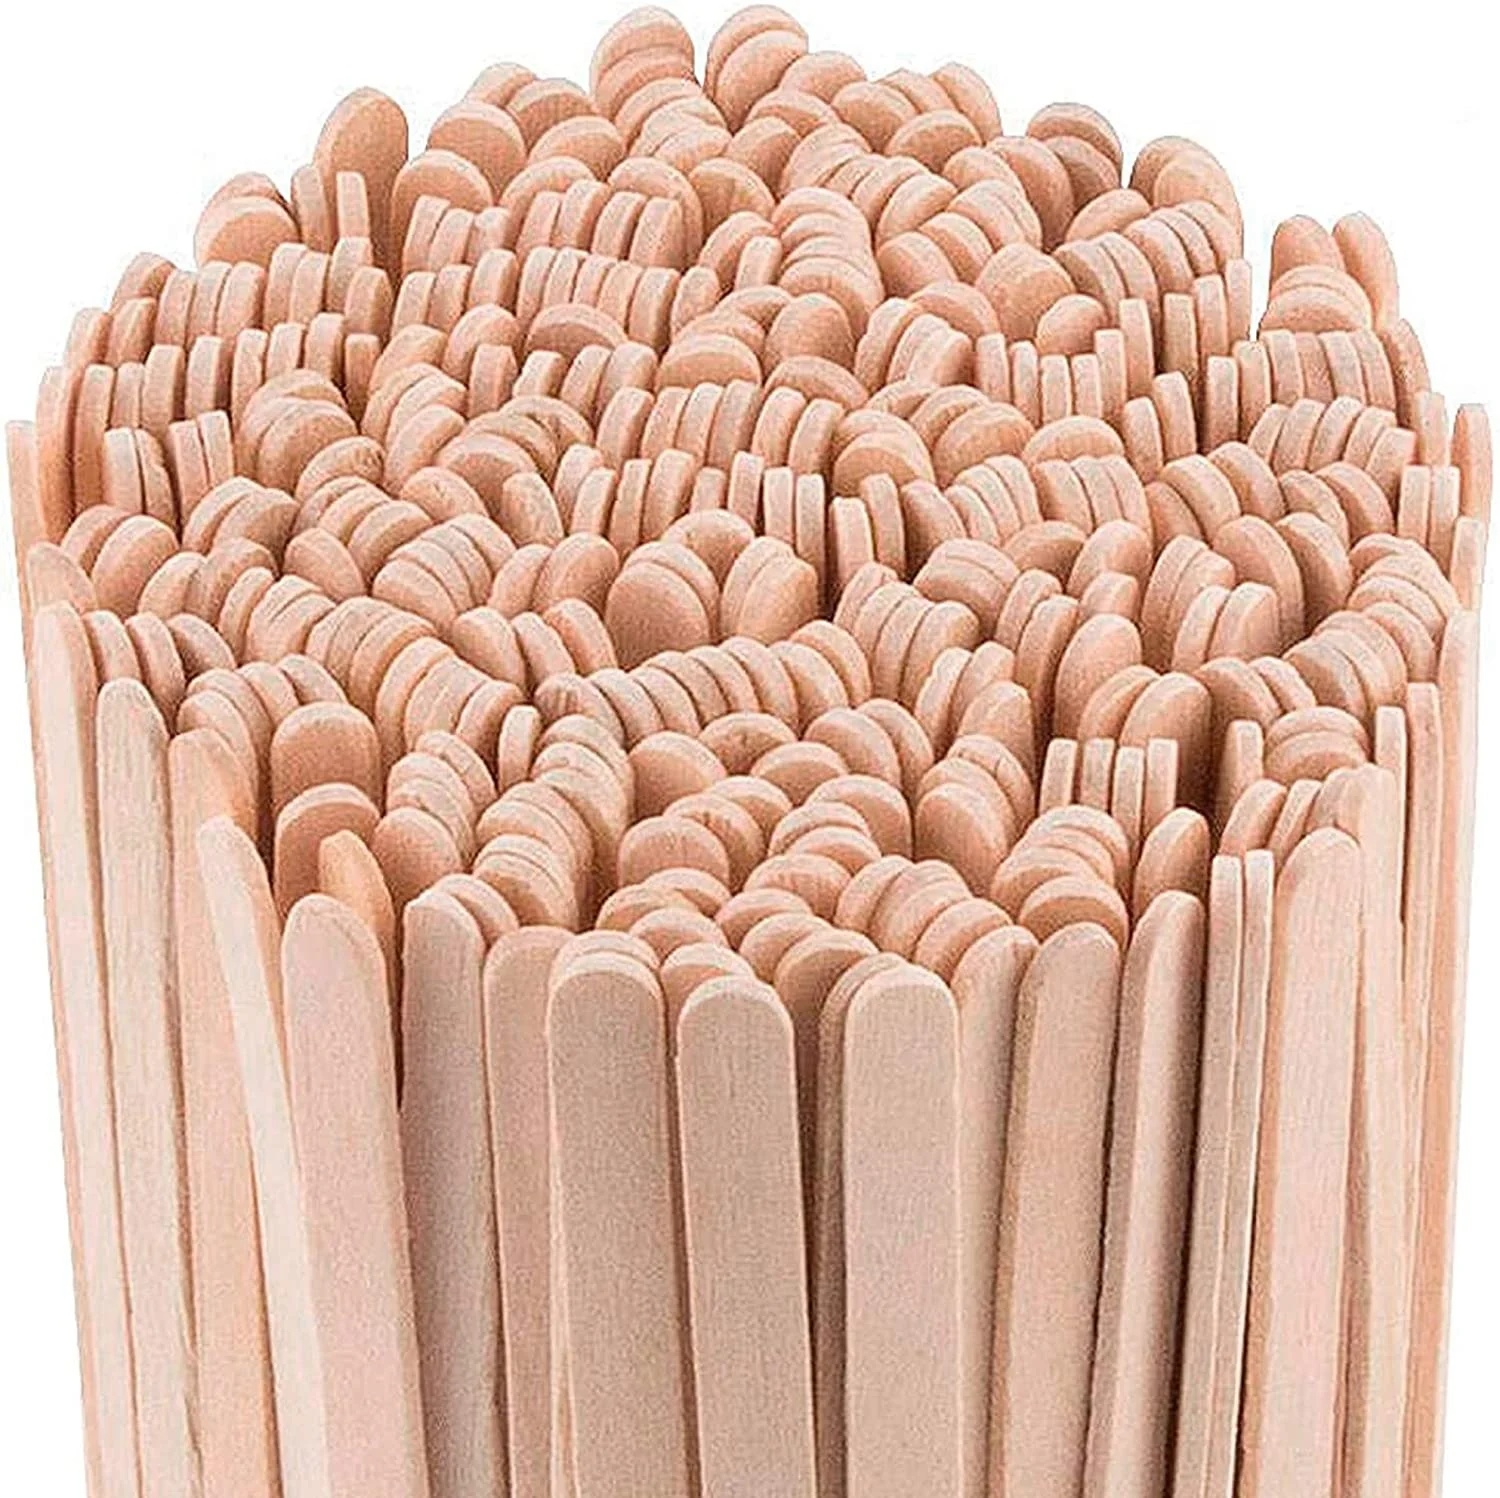 

Disposable Wooden Beverage Coffee Stirrers Sticks - Biodegradable Eco-Friendly, Natural